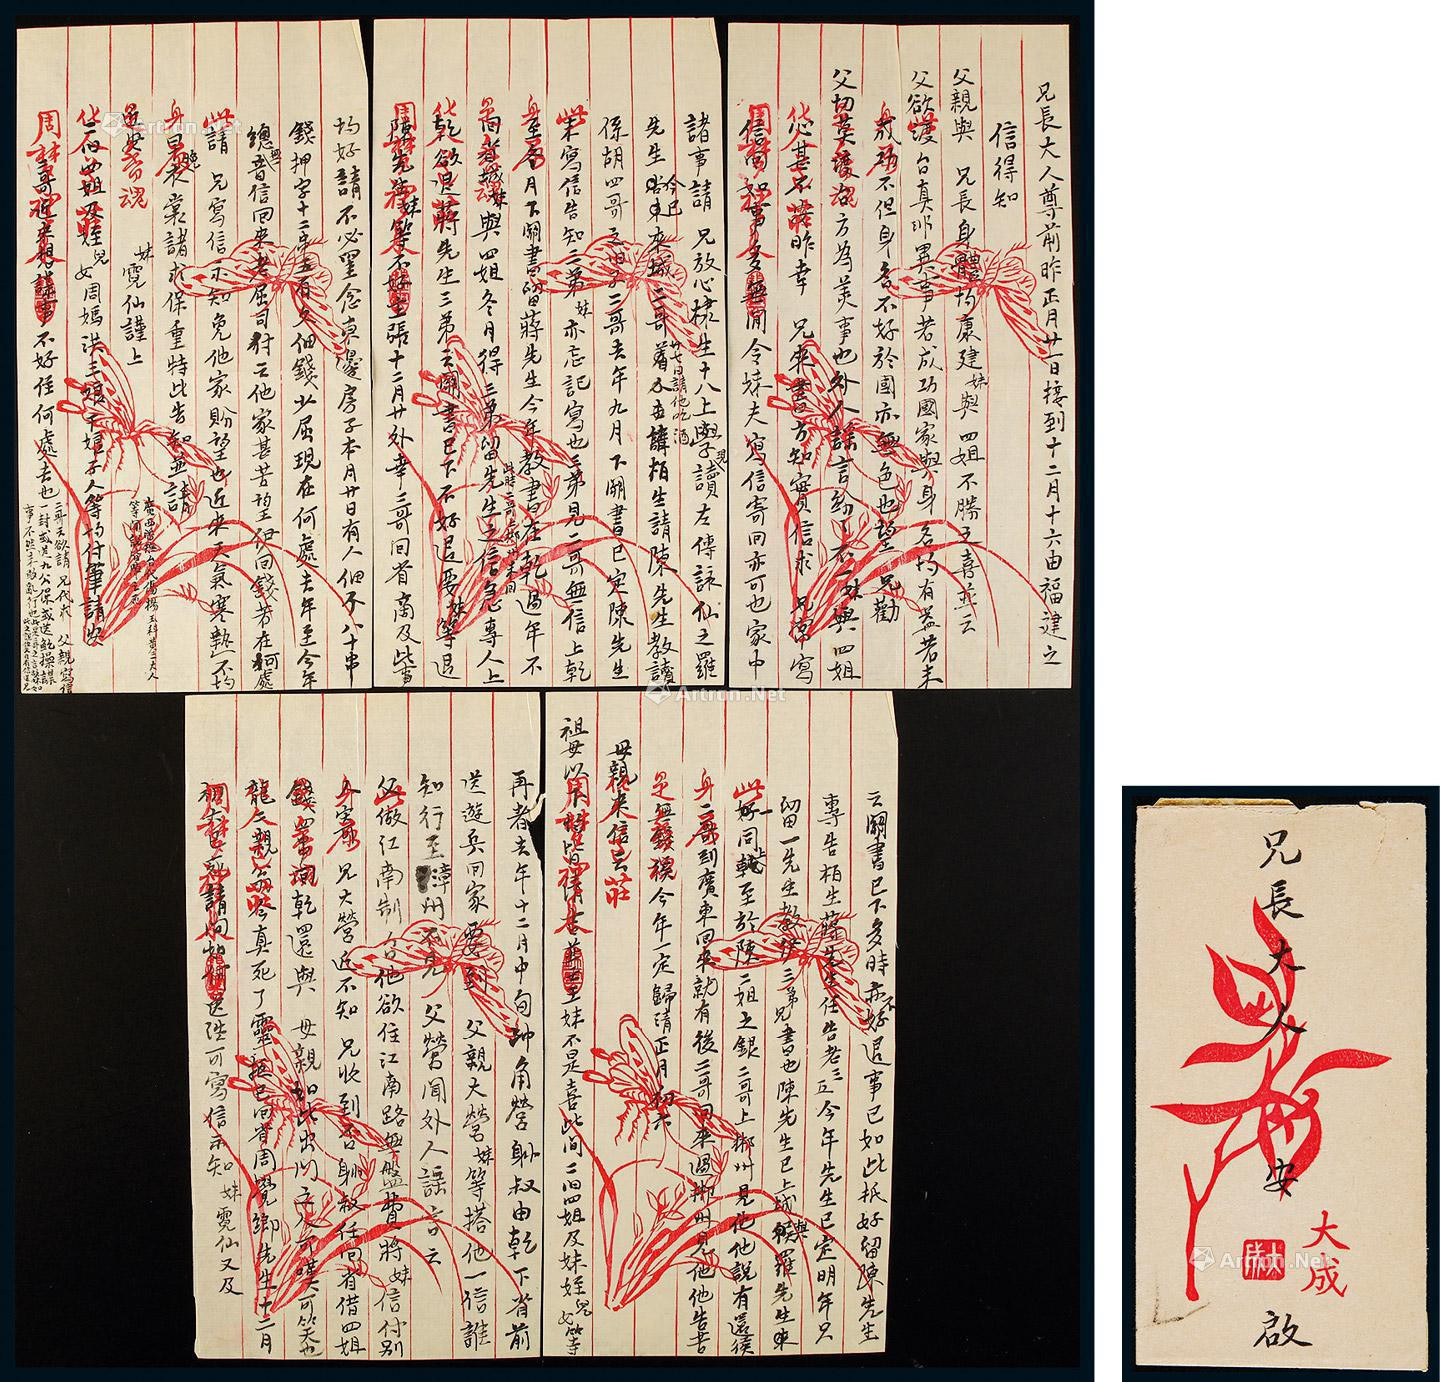 One letter of 5 pages by Ni Xian, daughter of Zuo Zongtang, to her brother, with original cover